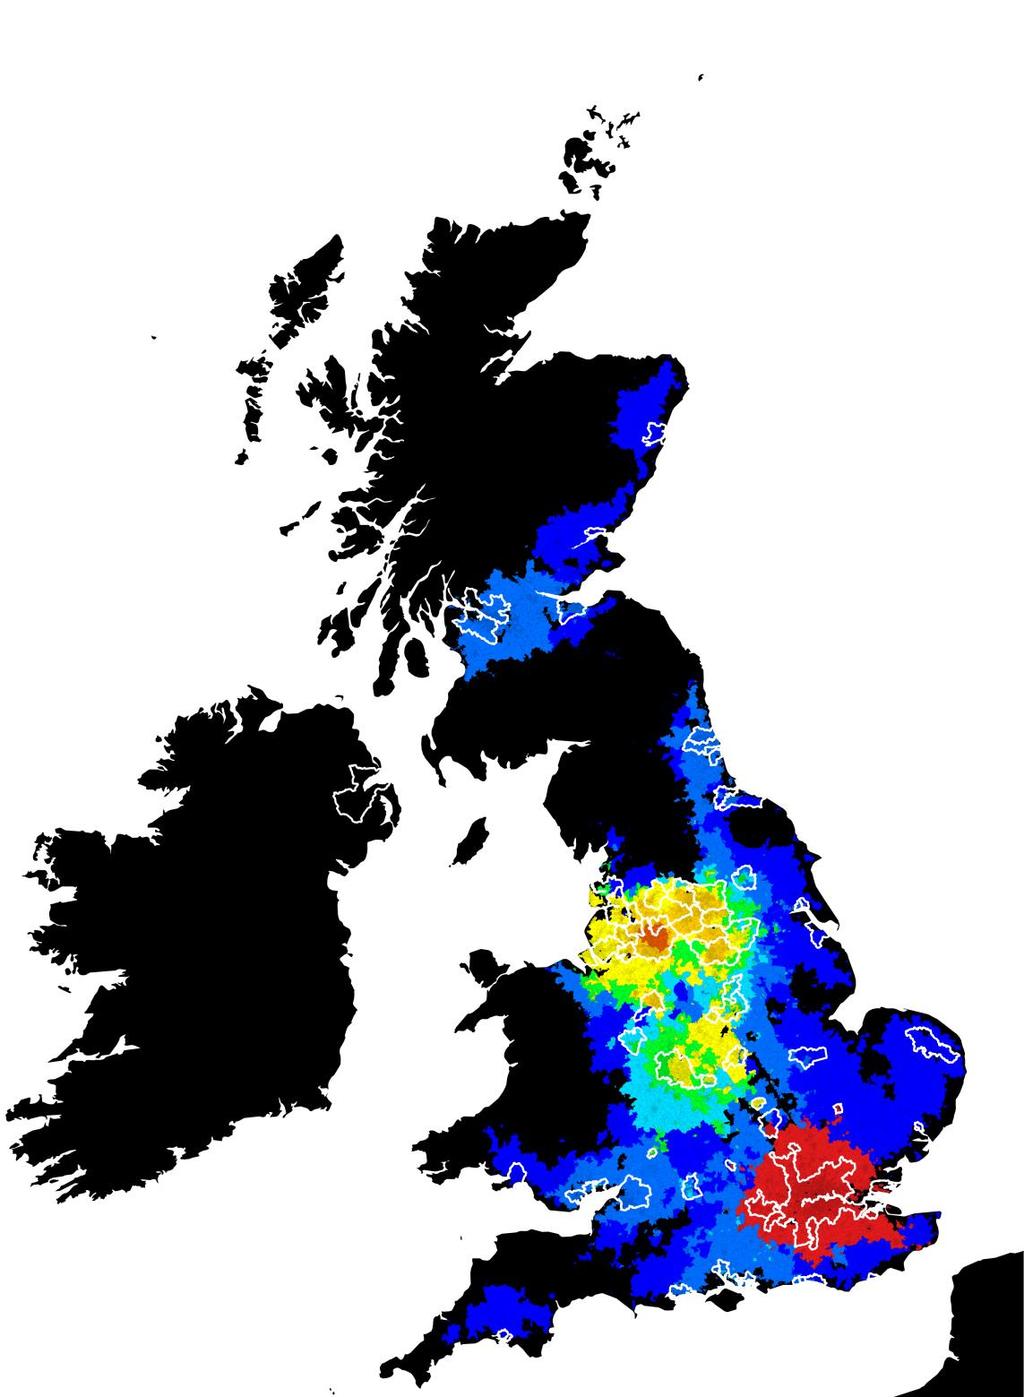 Combining Rail and Street network in a single spatial model UK GO Science